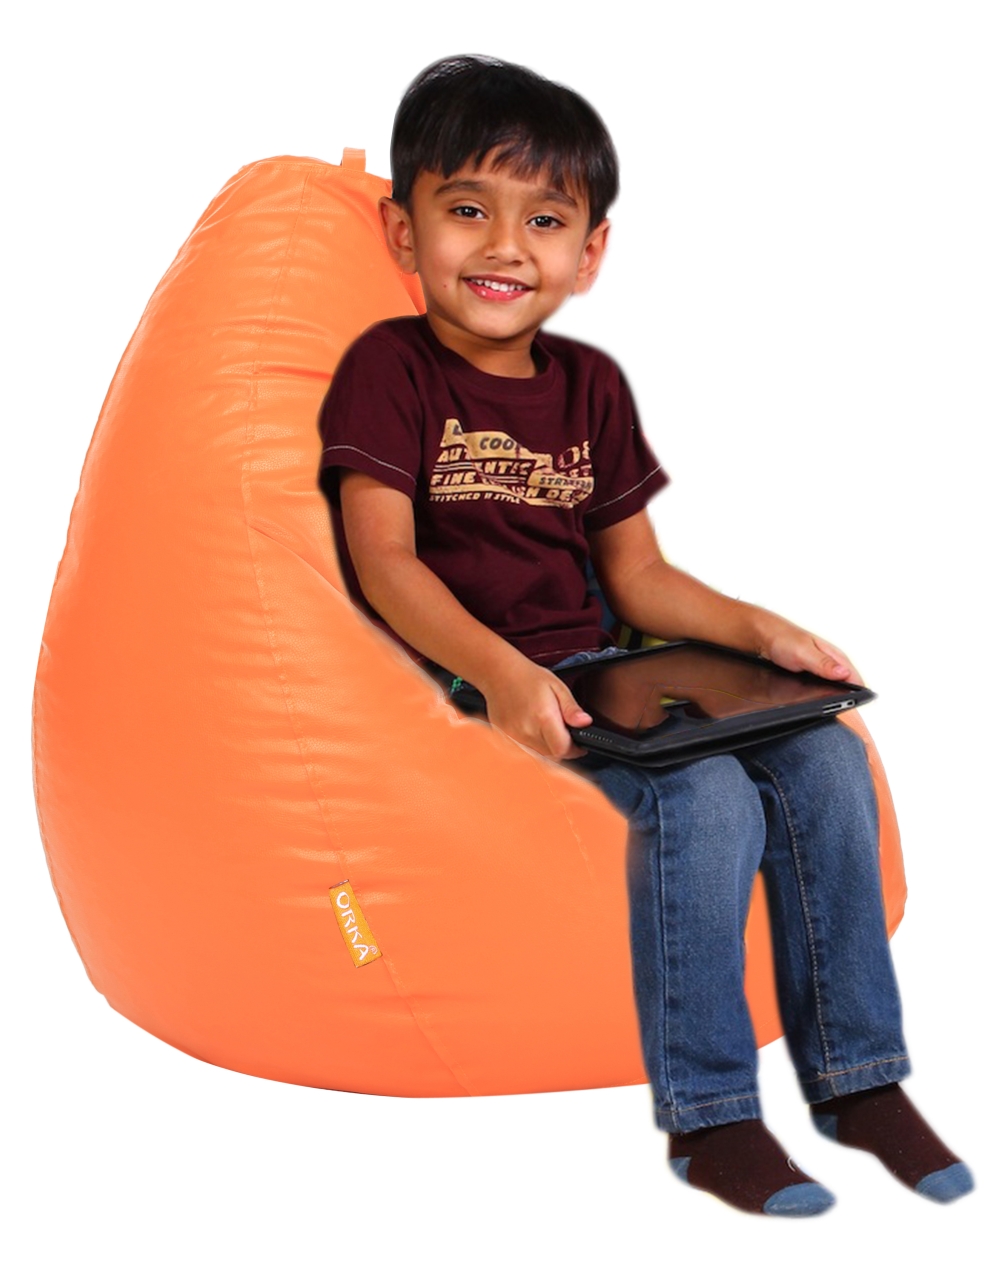 ORKA Classic Orange Bean Bag With Matching Footstool   Kids  Bean Bag Cover 